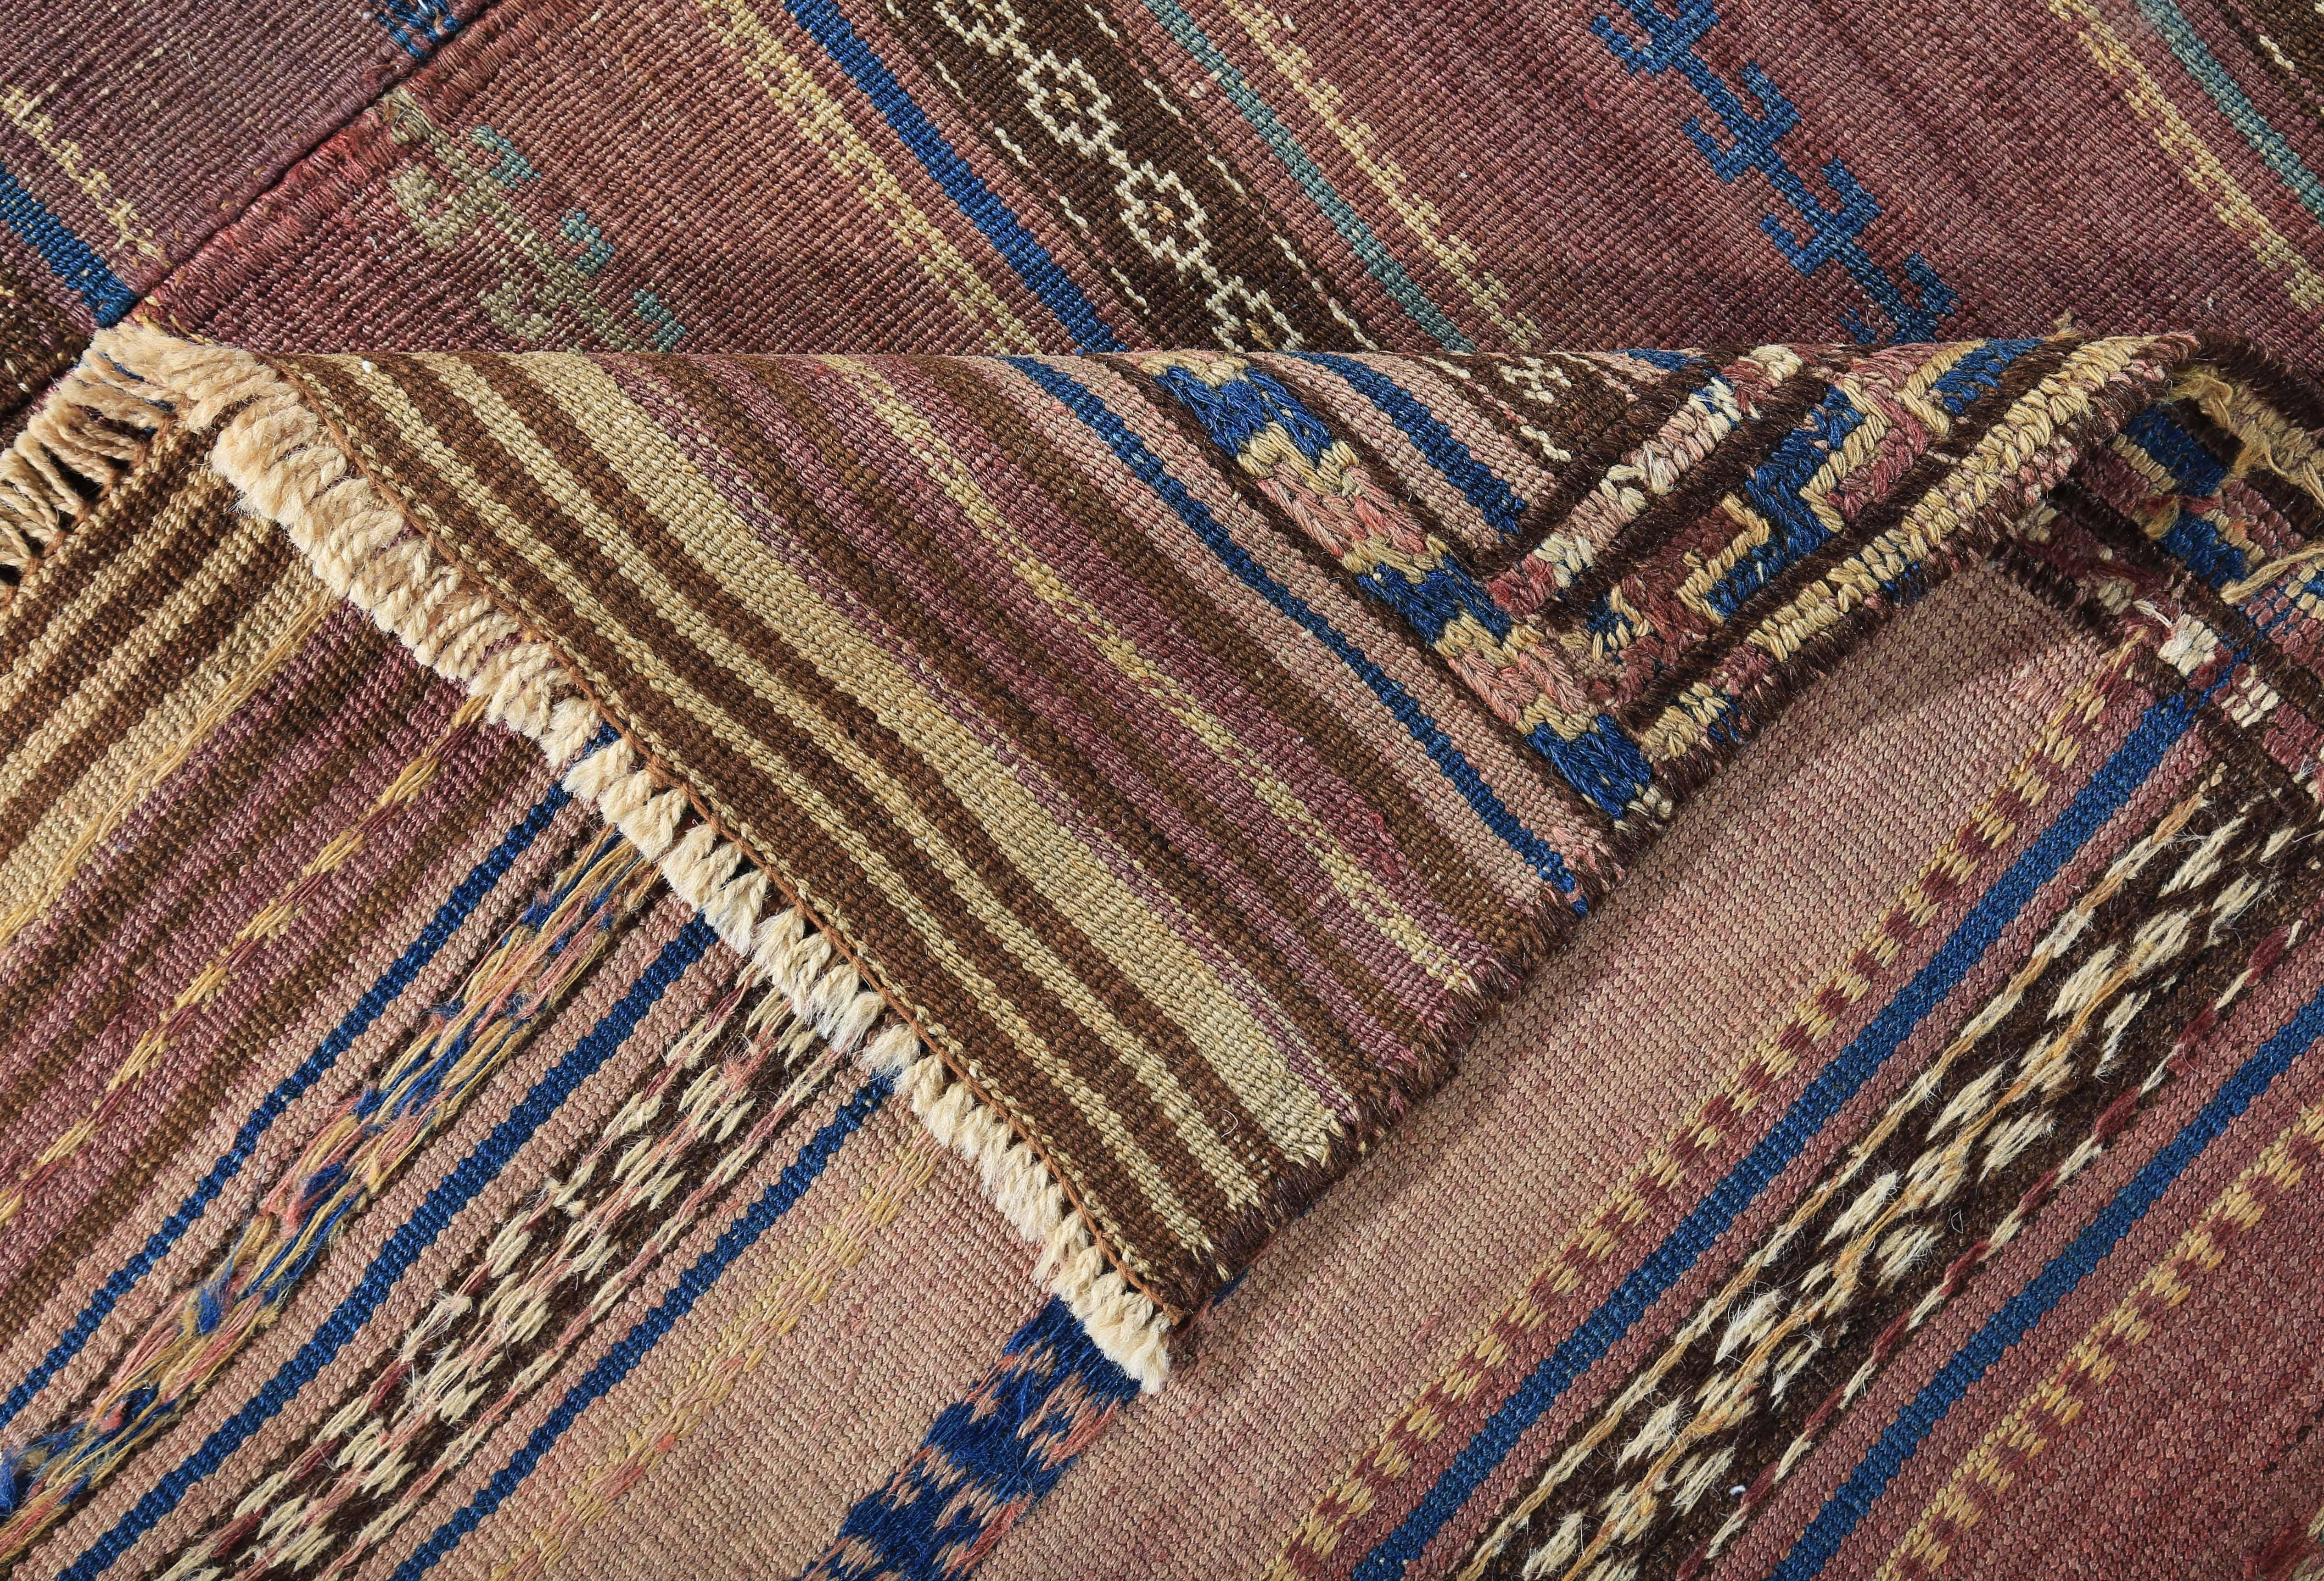 Hand-Woven Modern Turkish Kilim Rug with Navy and White Tribal Details on Brown Field For Sale